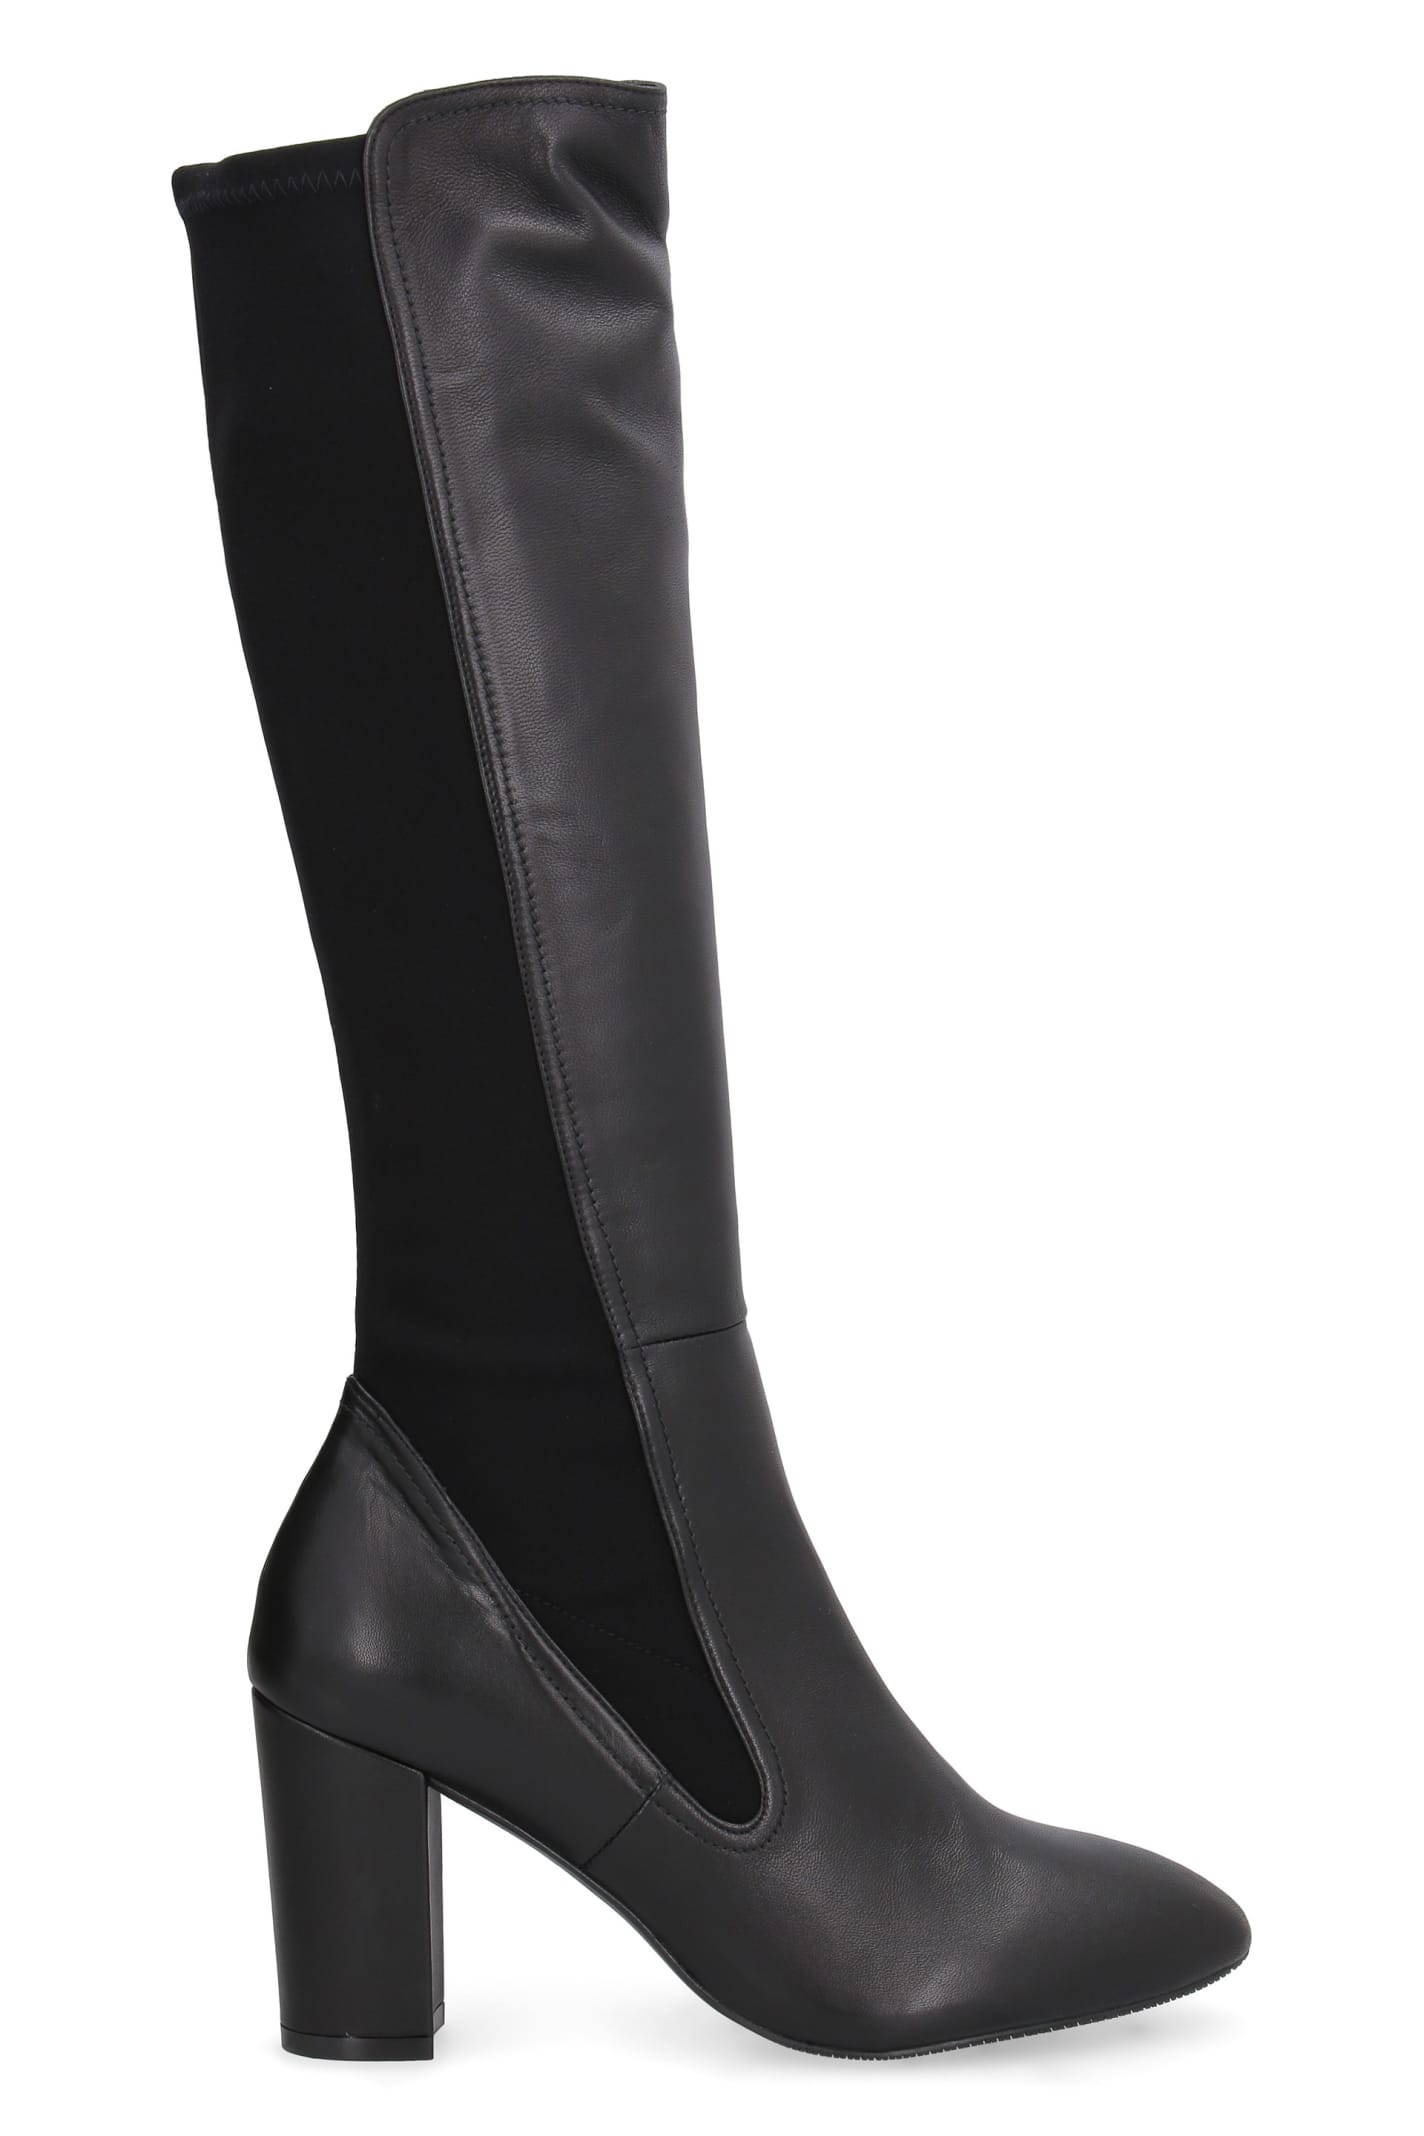 Stuart Weitzman Leather And Stretch Fabric Boots